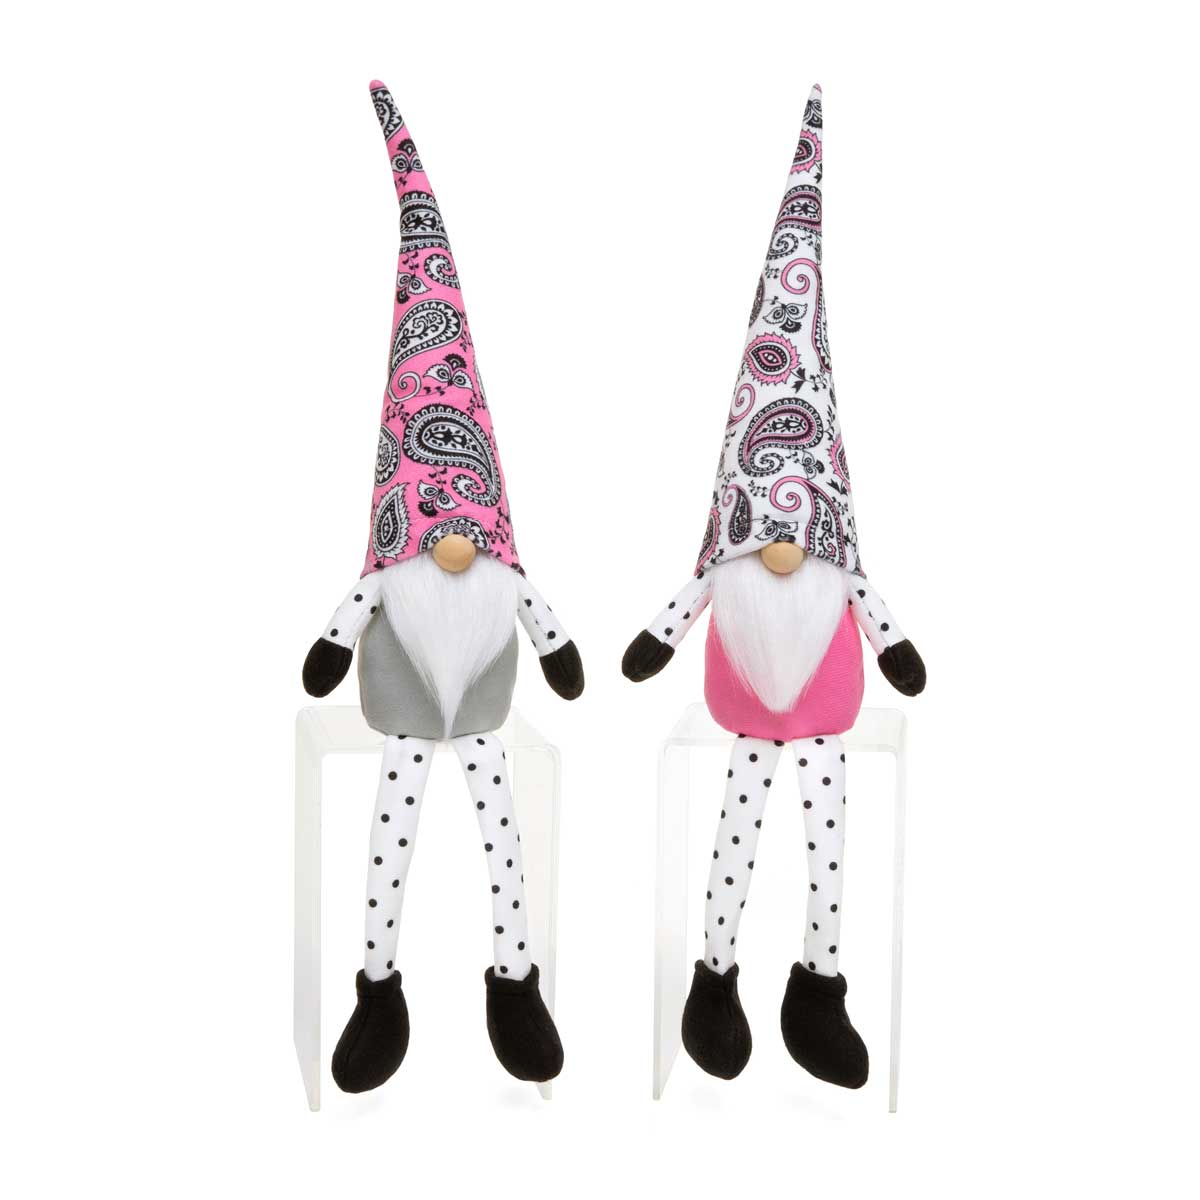 PAISLEY PAL GNOME DUO WITH PINK/BLACK/WHITE WIRED HAT,